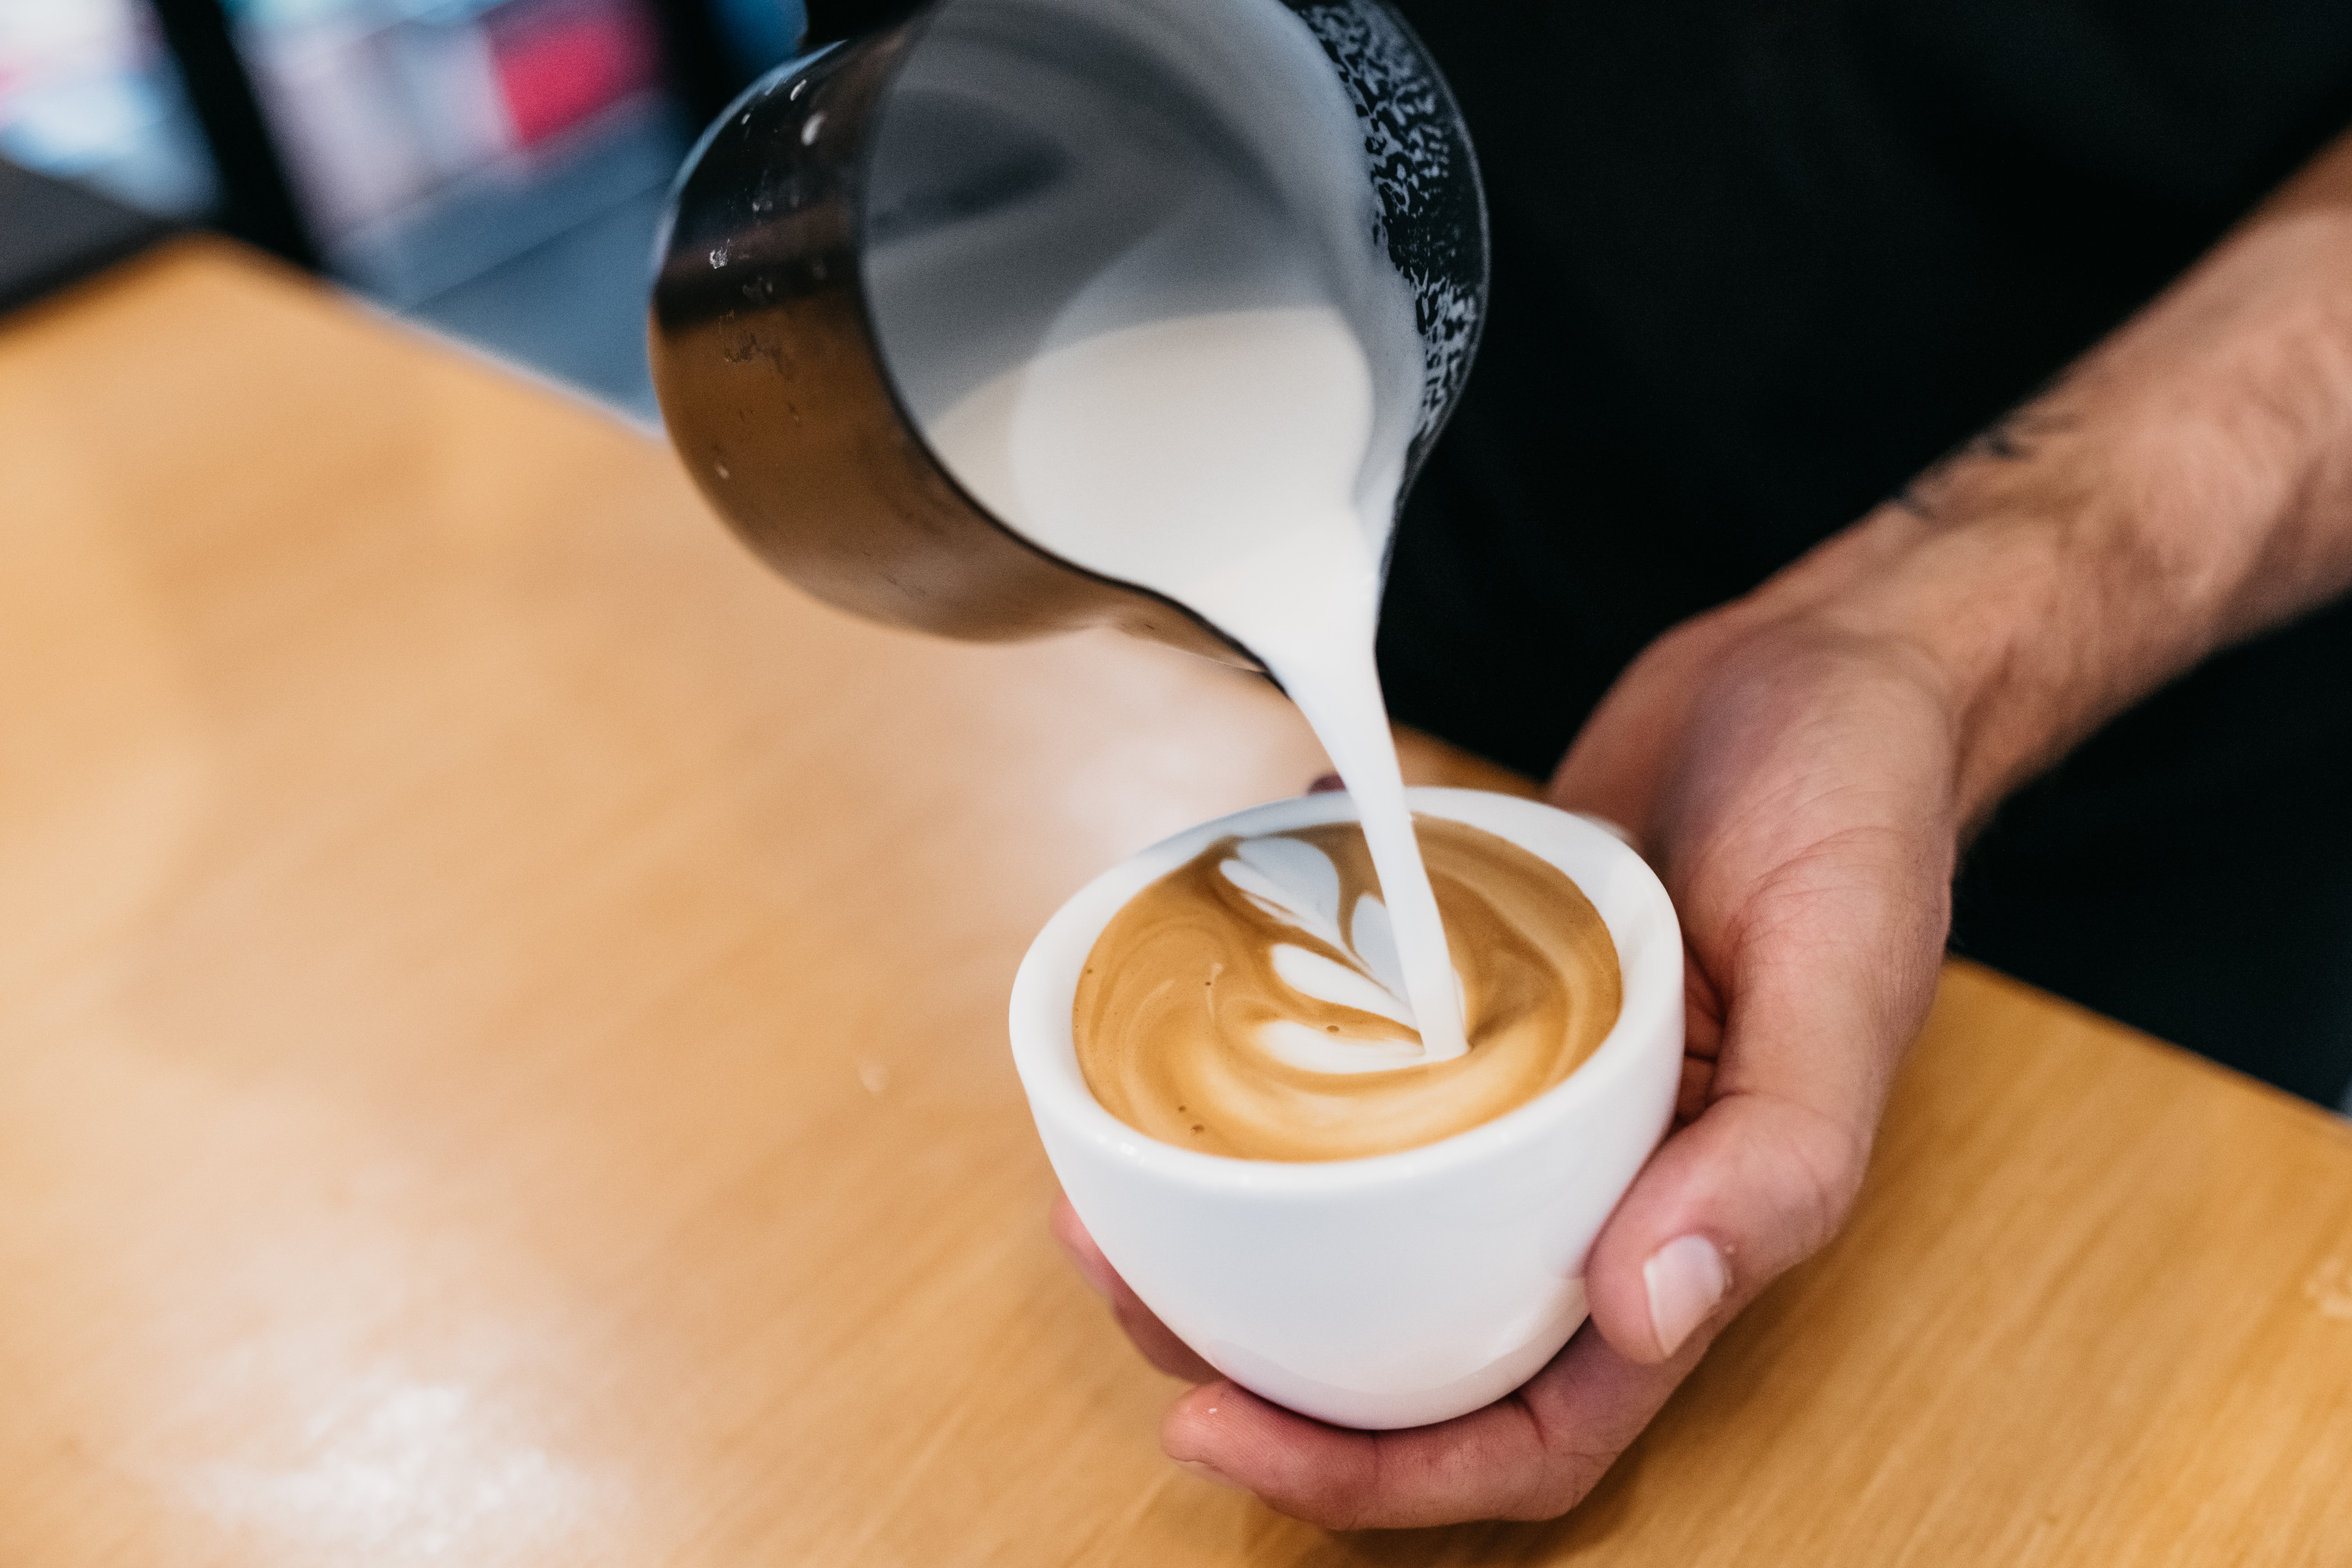 a close up shot of a person pouring coffee in a cup